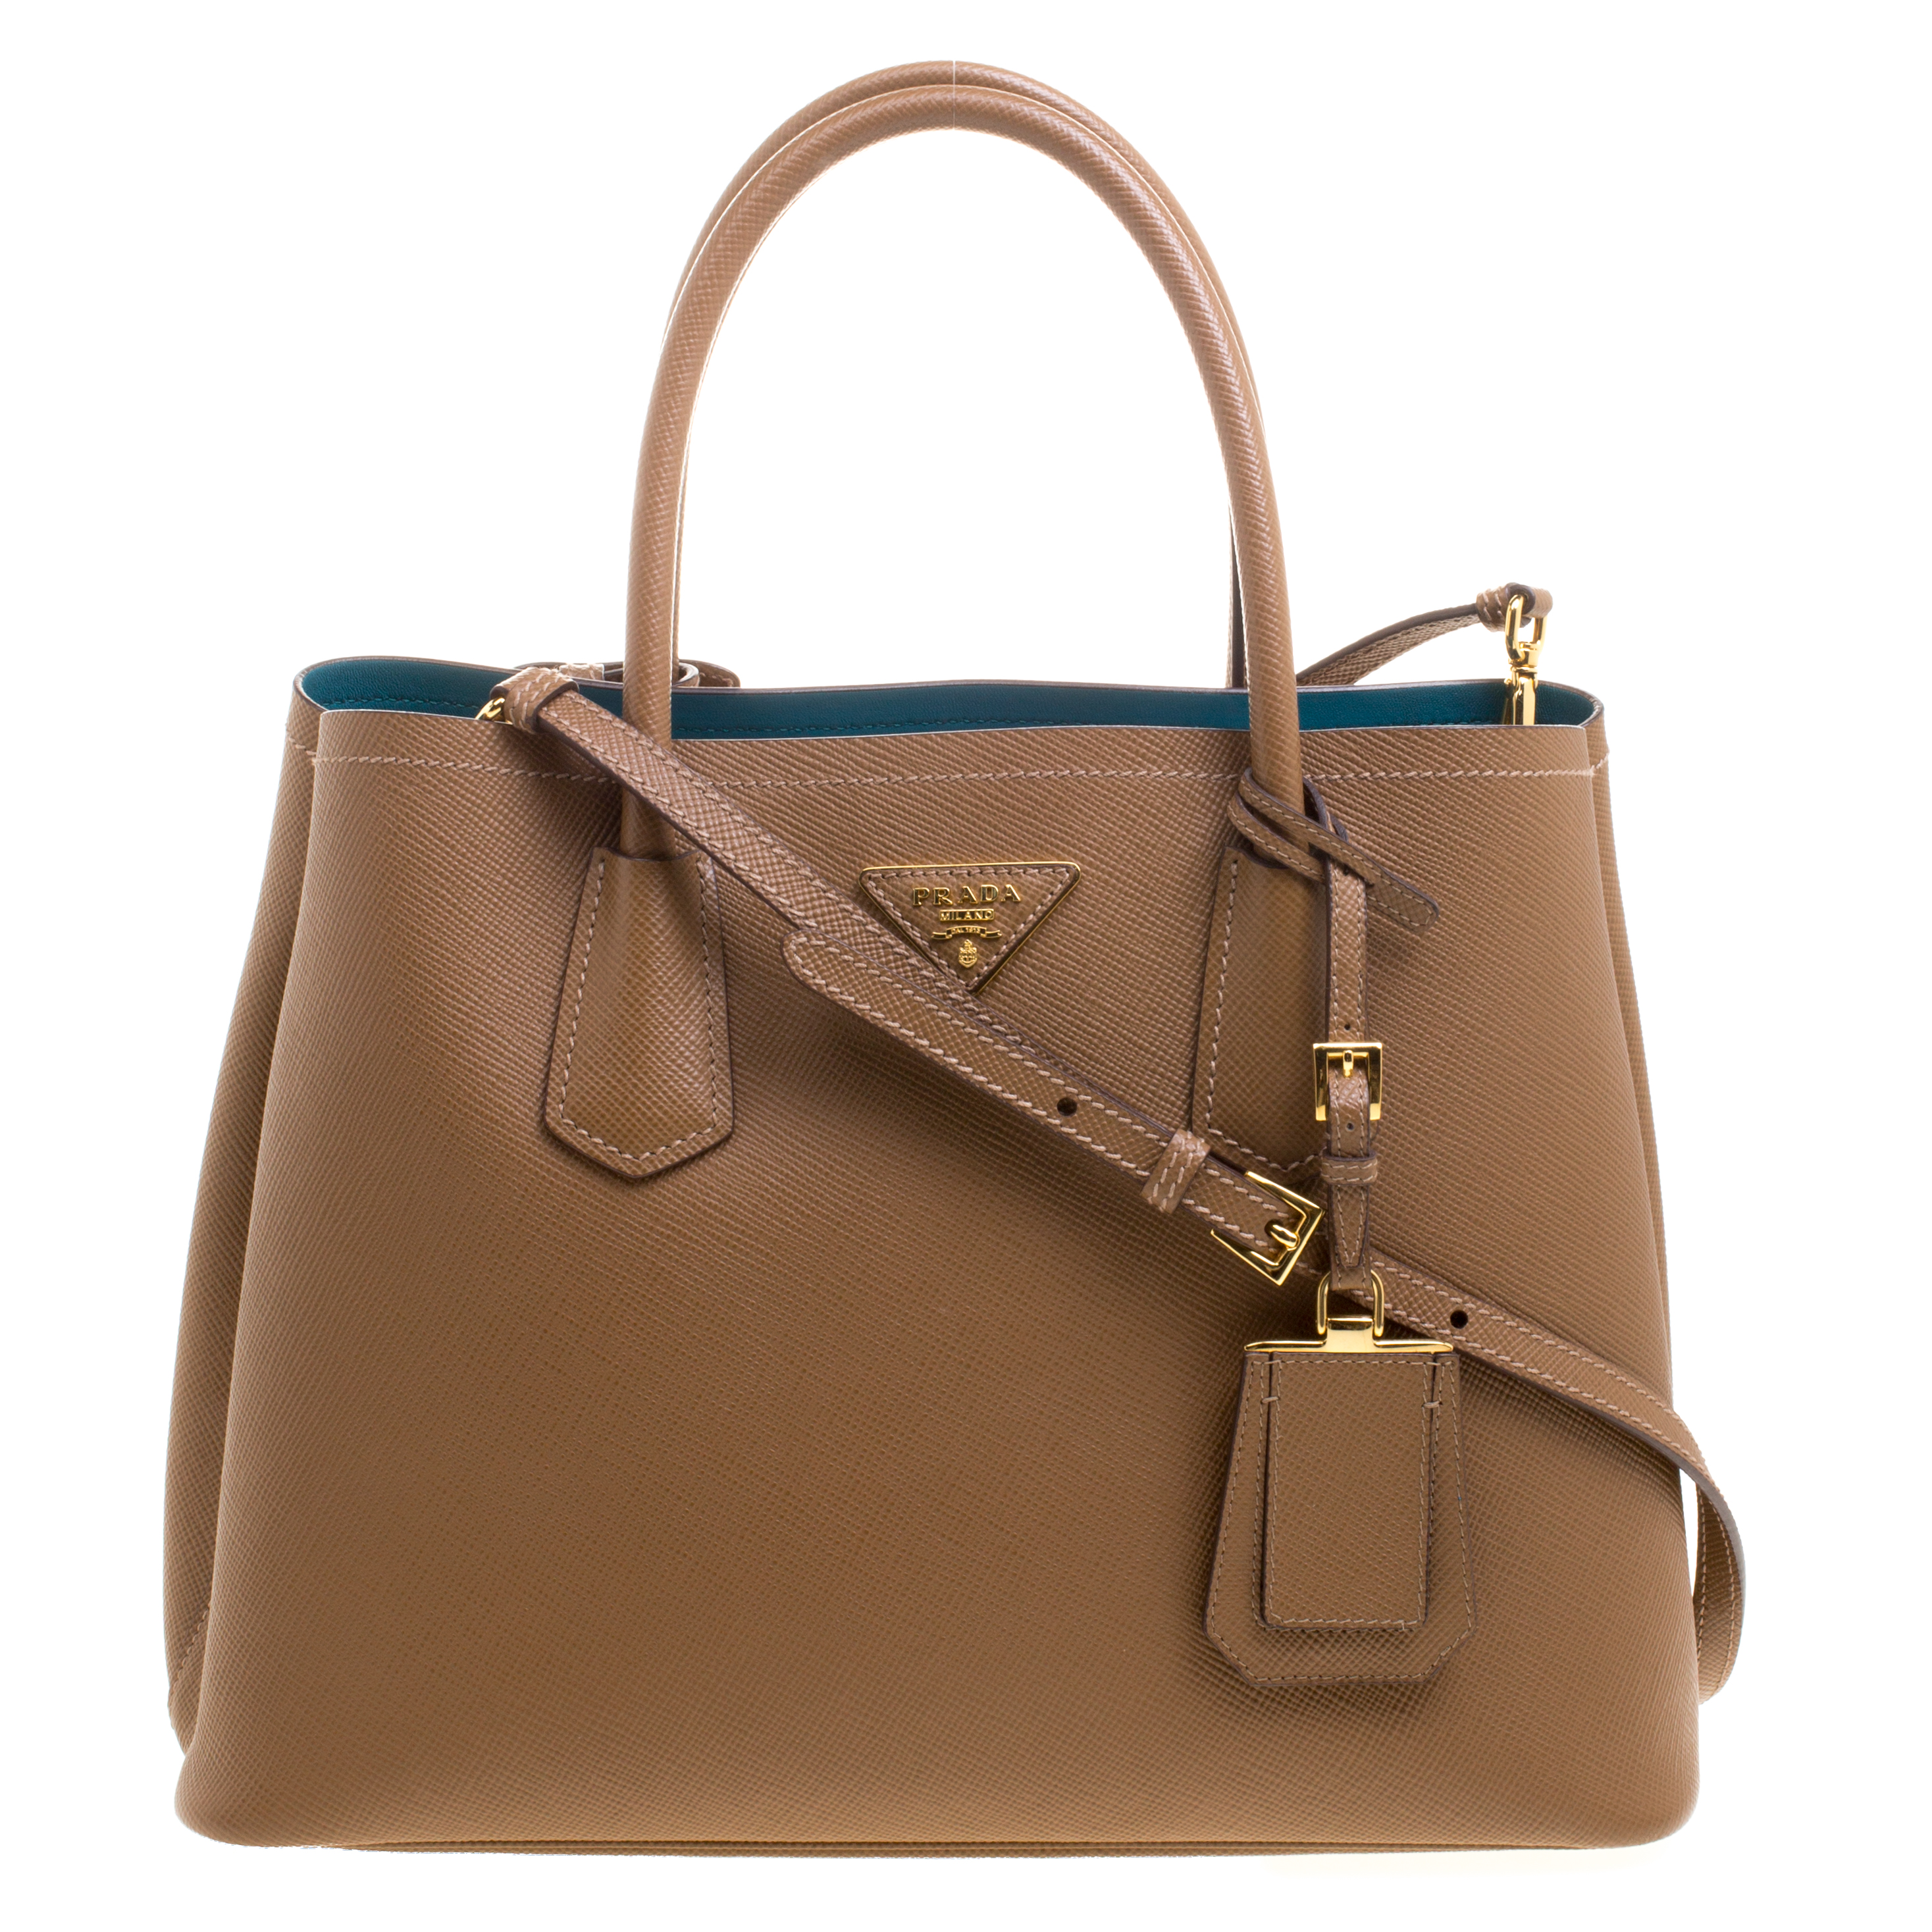 Prada Brown Saffiano Cuir Leather Double Handle Tote